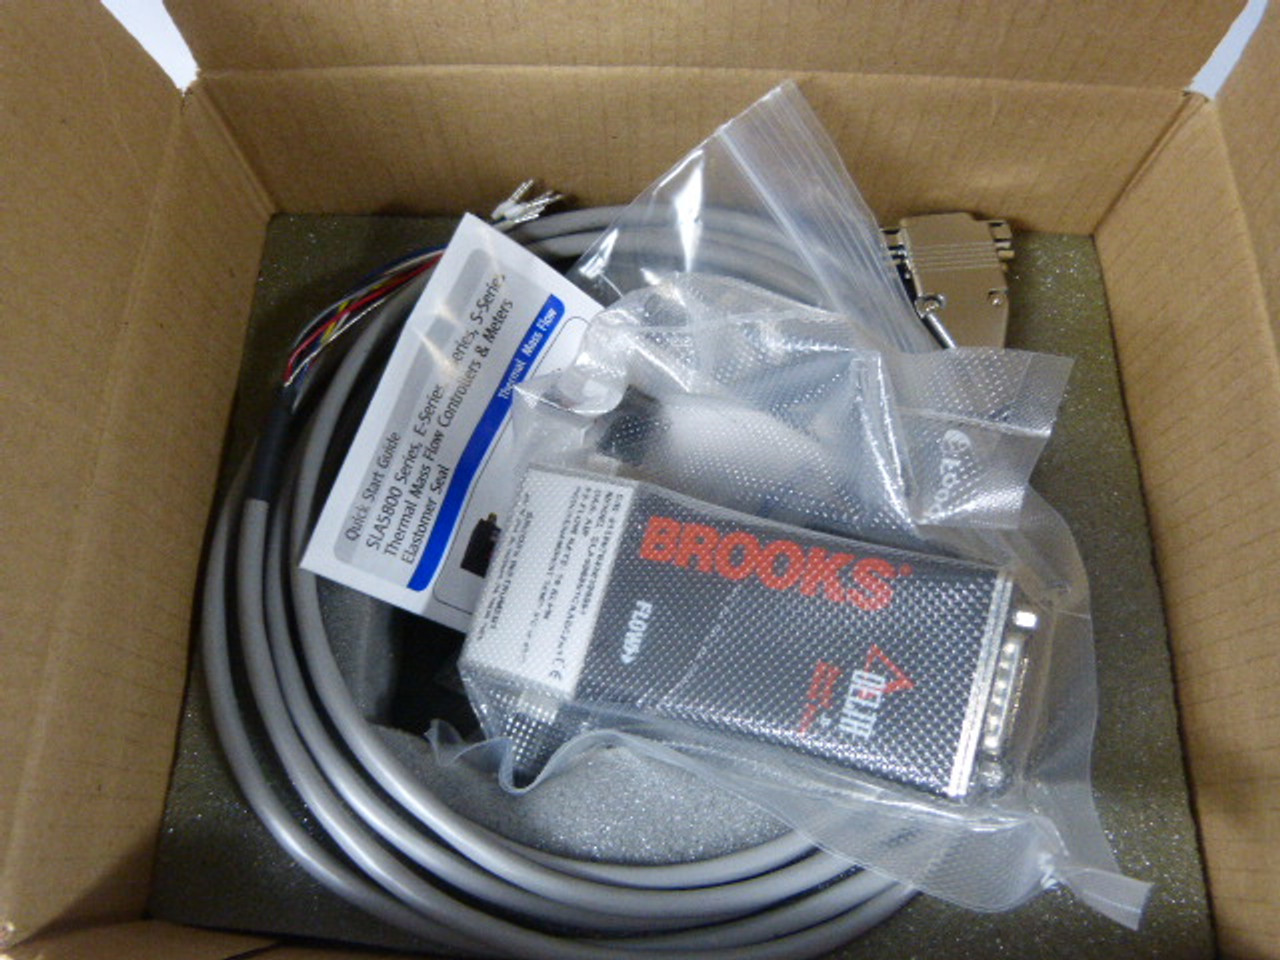 Brooks 5860S/BC Smart Mass Flow Meter 0-30 In Min Air ! NEW !